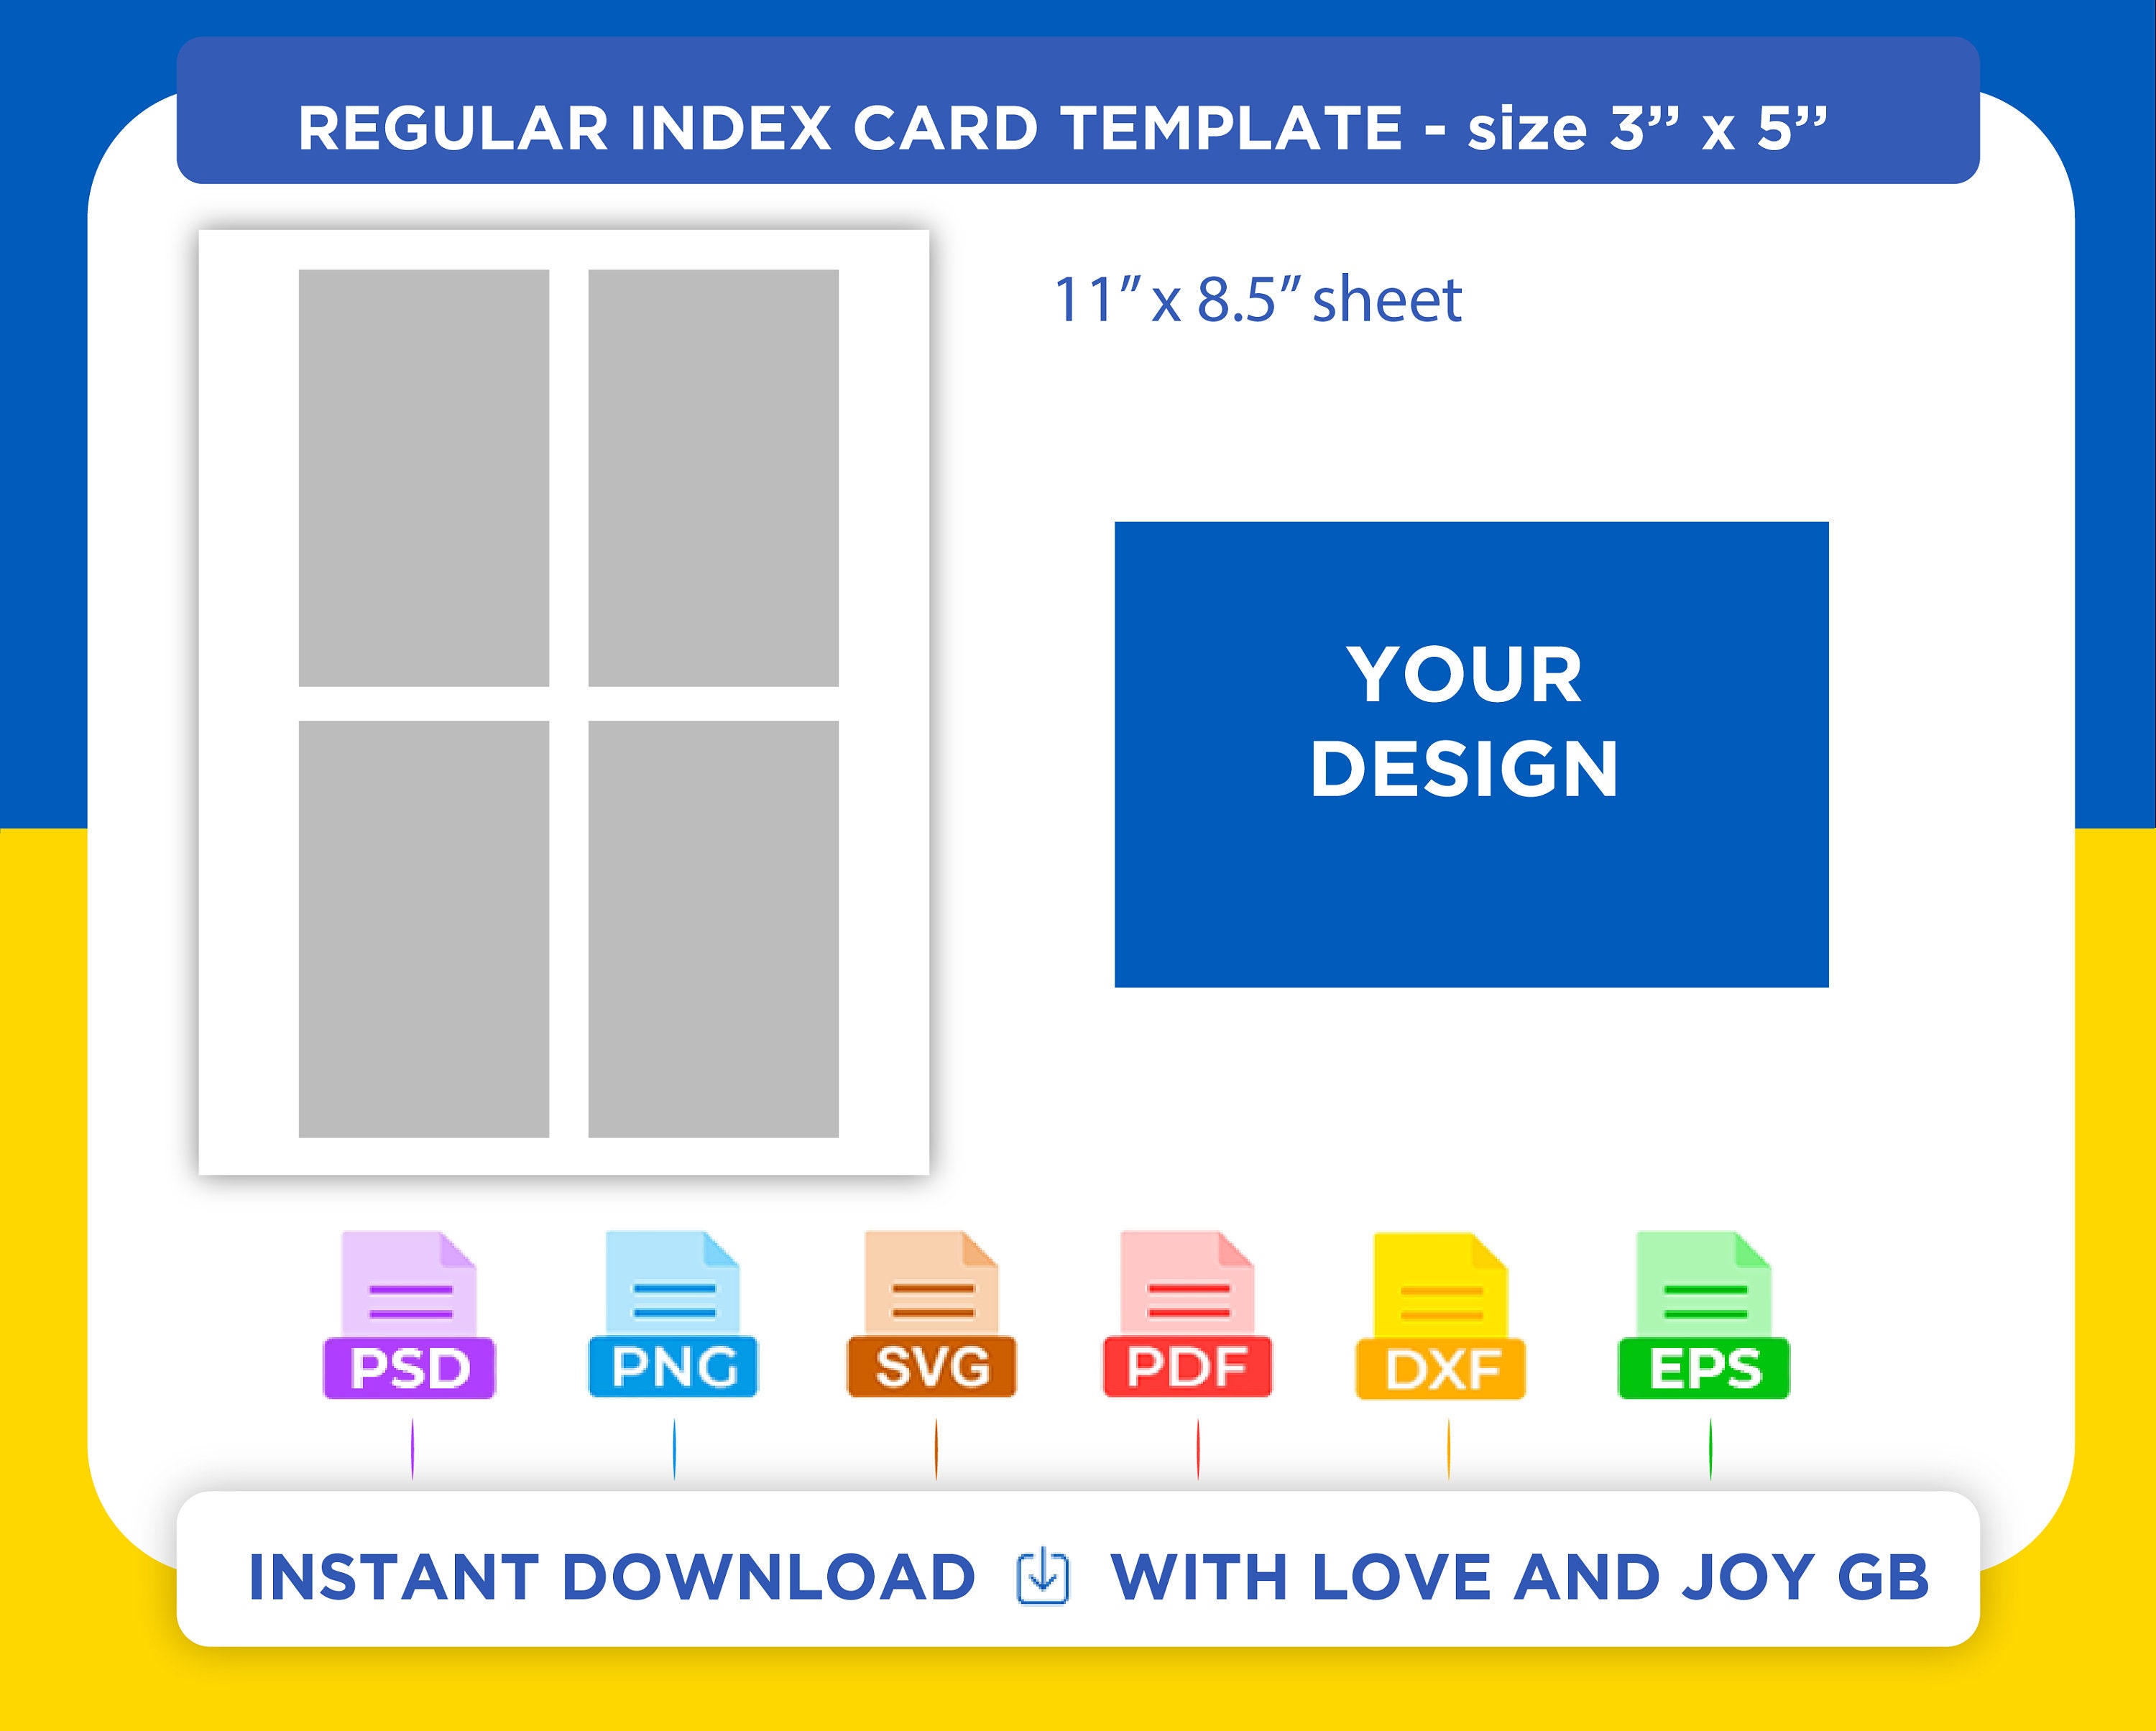 Printable 4x6 Index Card, Fillable Note Cards, Editable Index Cards. Blank Index  Cards, Index Card PDF, DIY Flashcard Template, SB037 